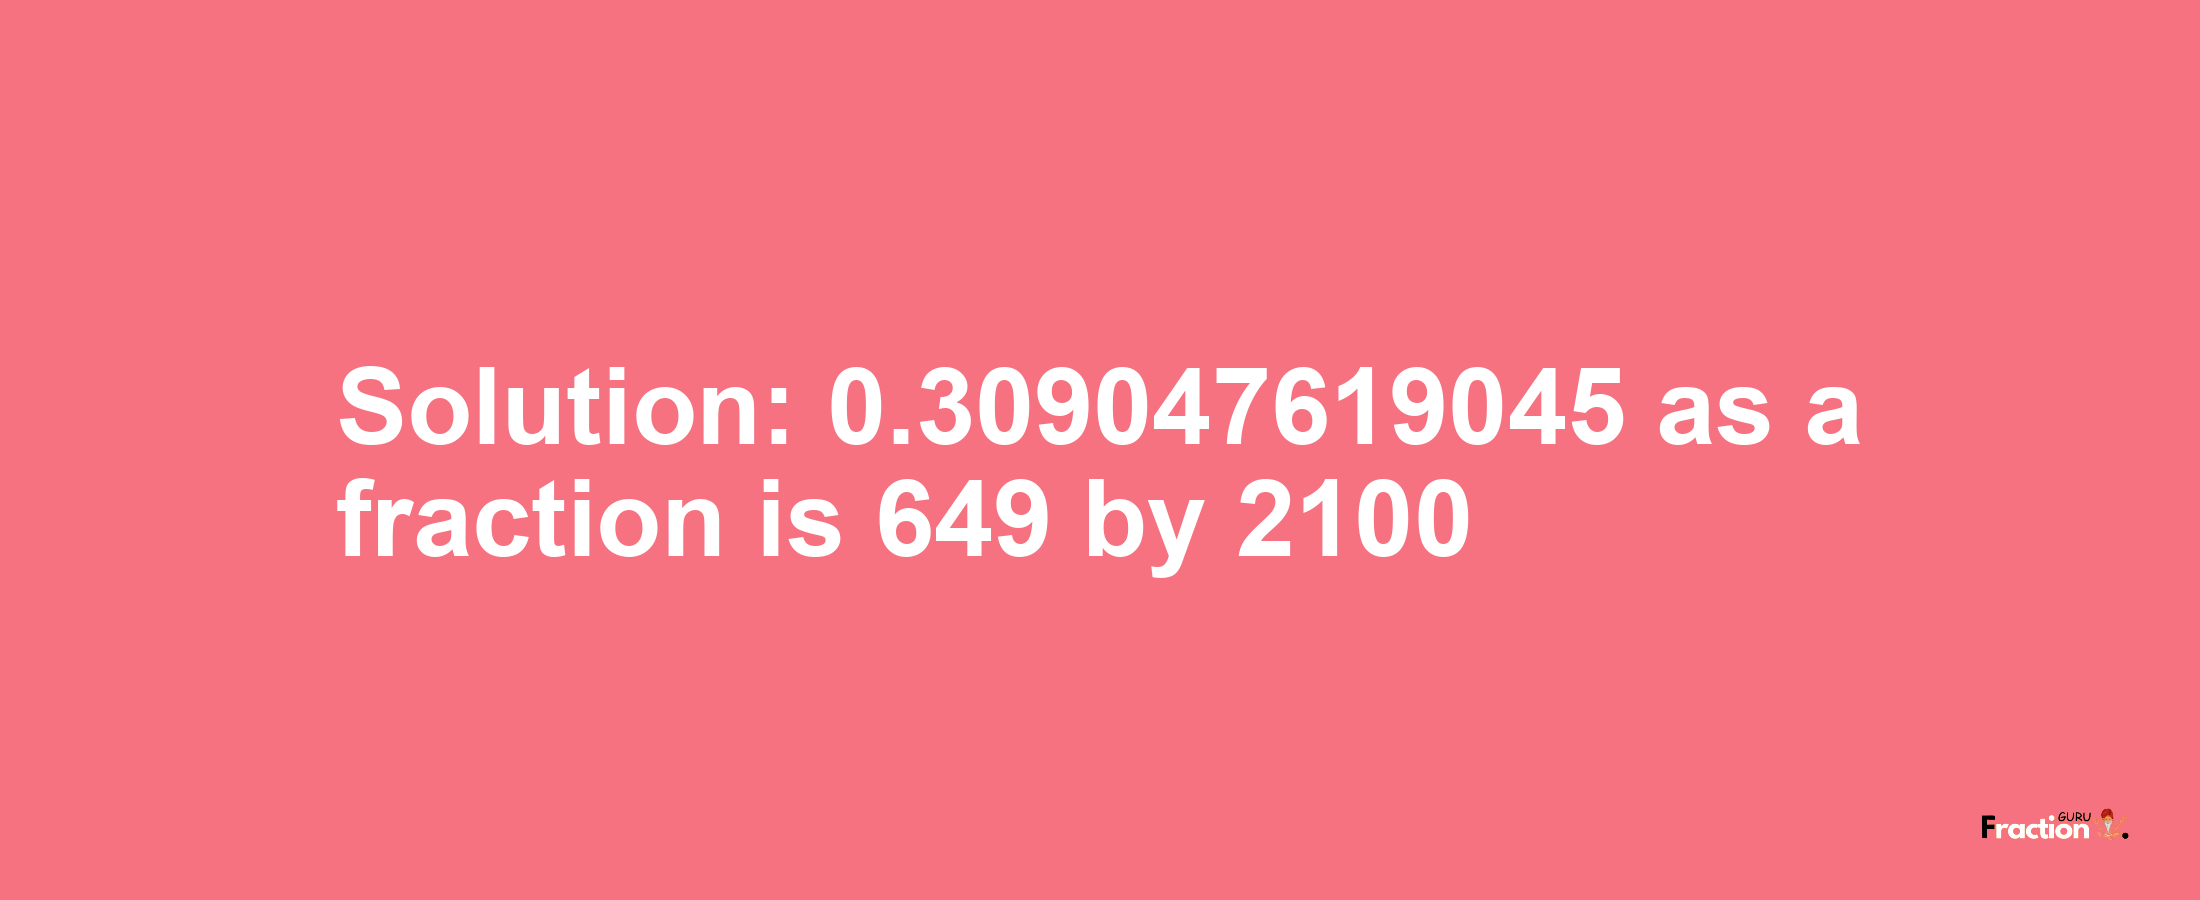 Solution:0.309047619045 as a fraction is 649/2100